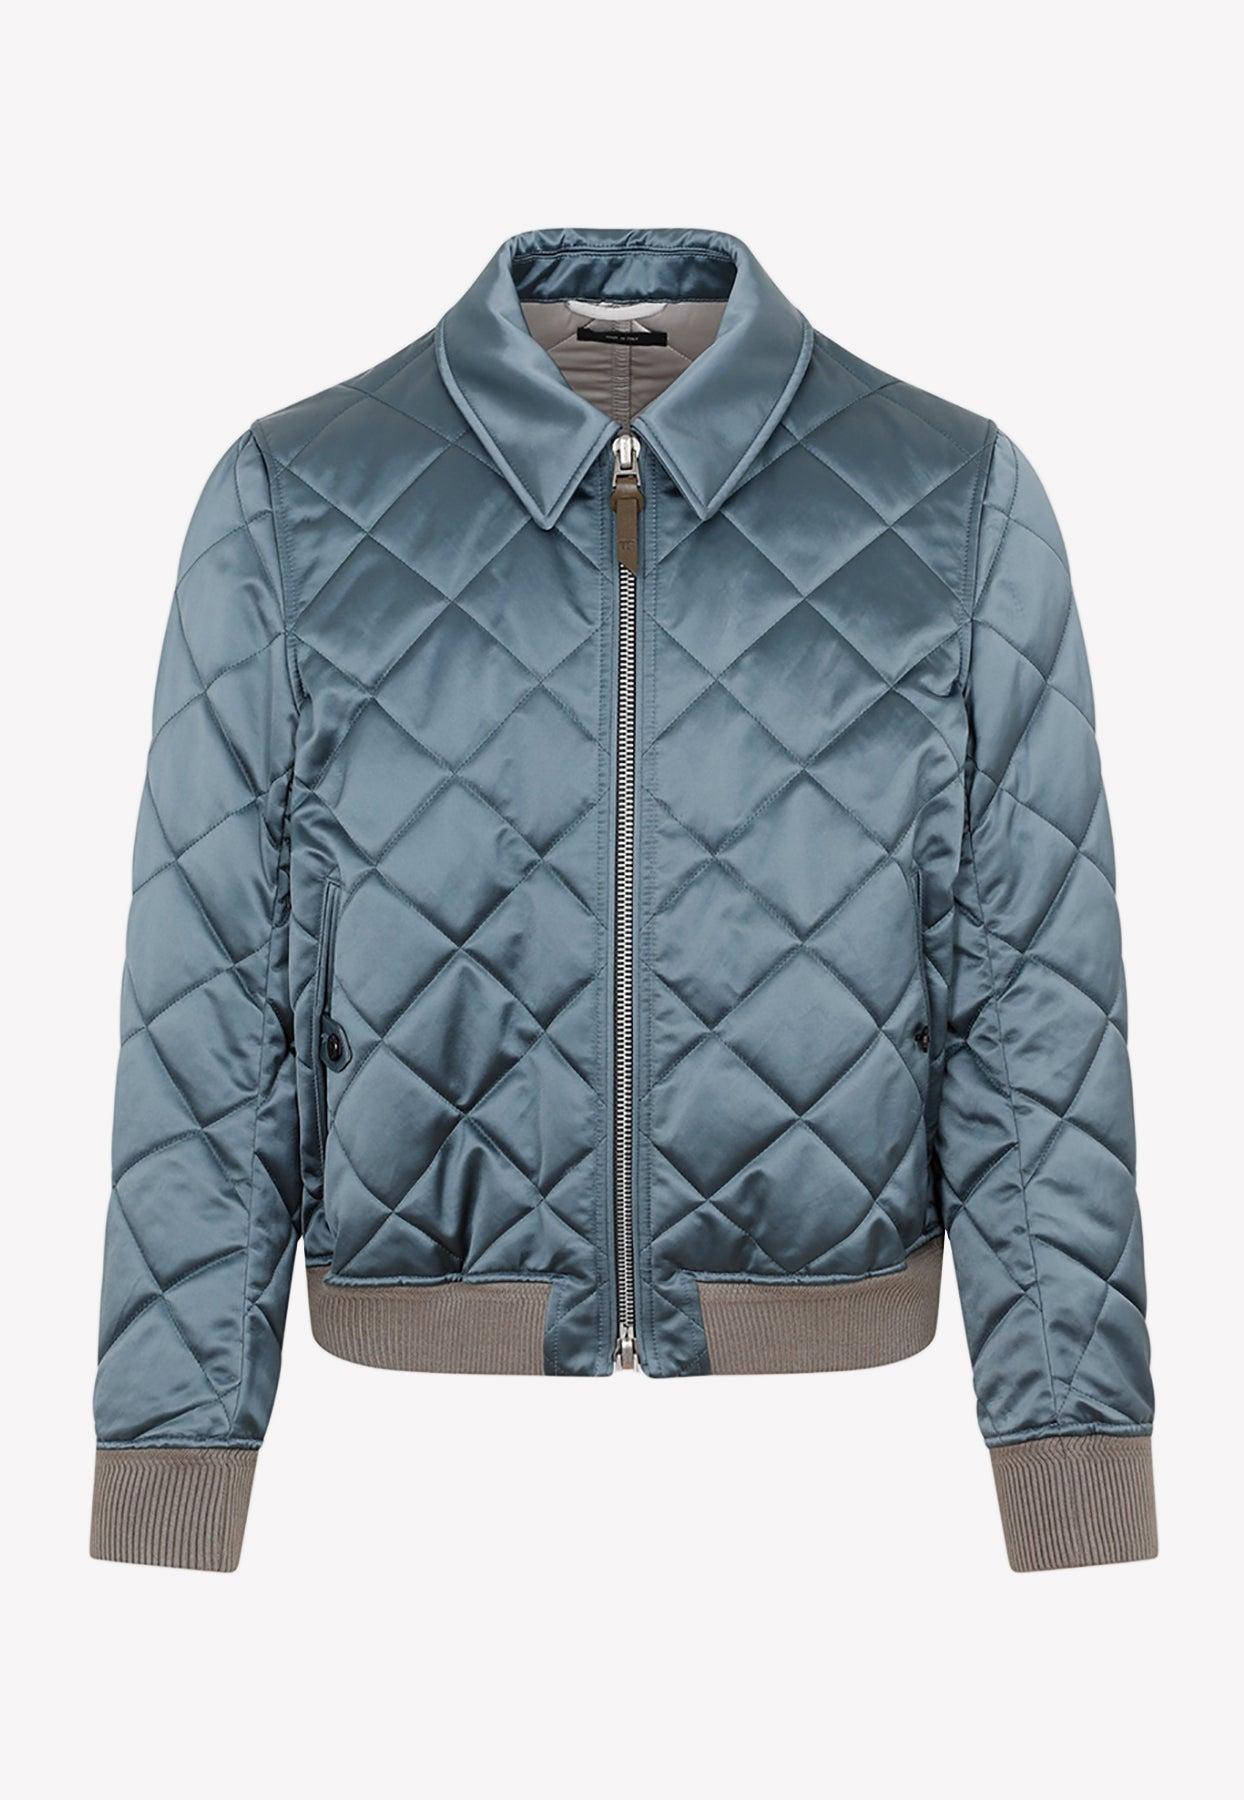 Tom Ford Satin Diamond Quilted Bomber Jacket in Blue for Men | Lyst